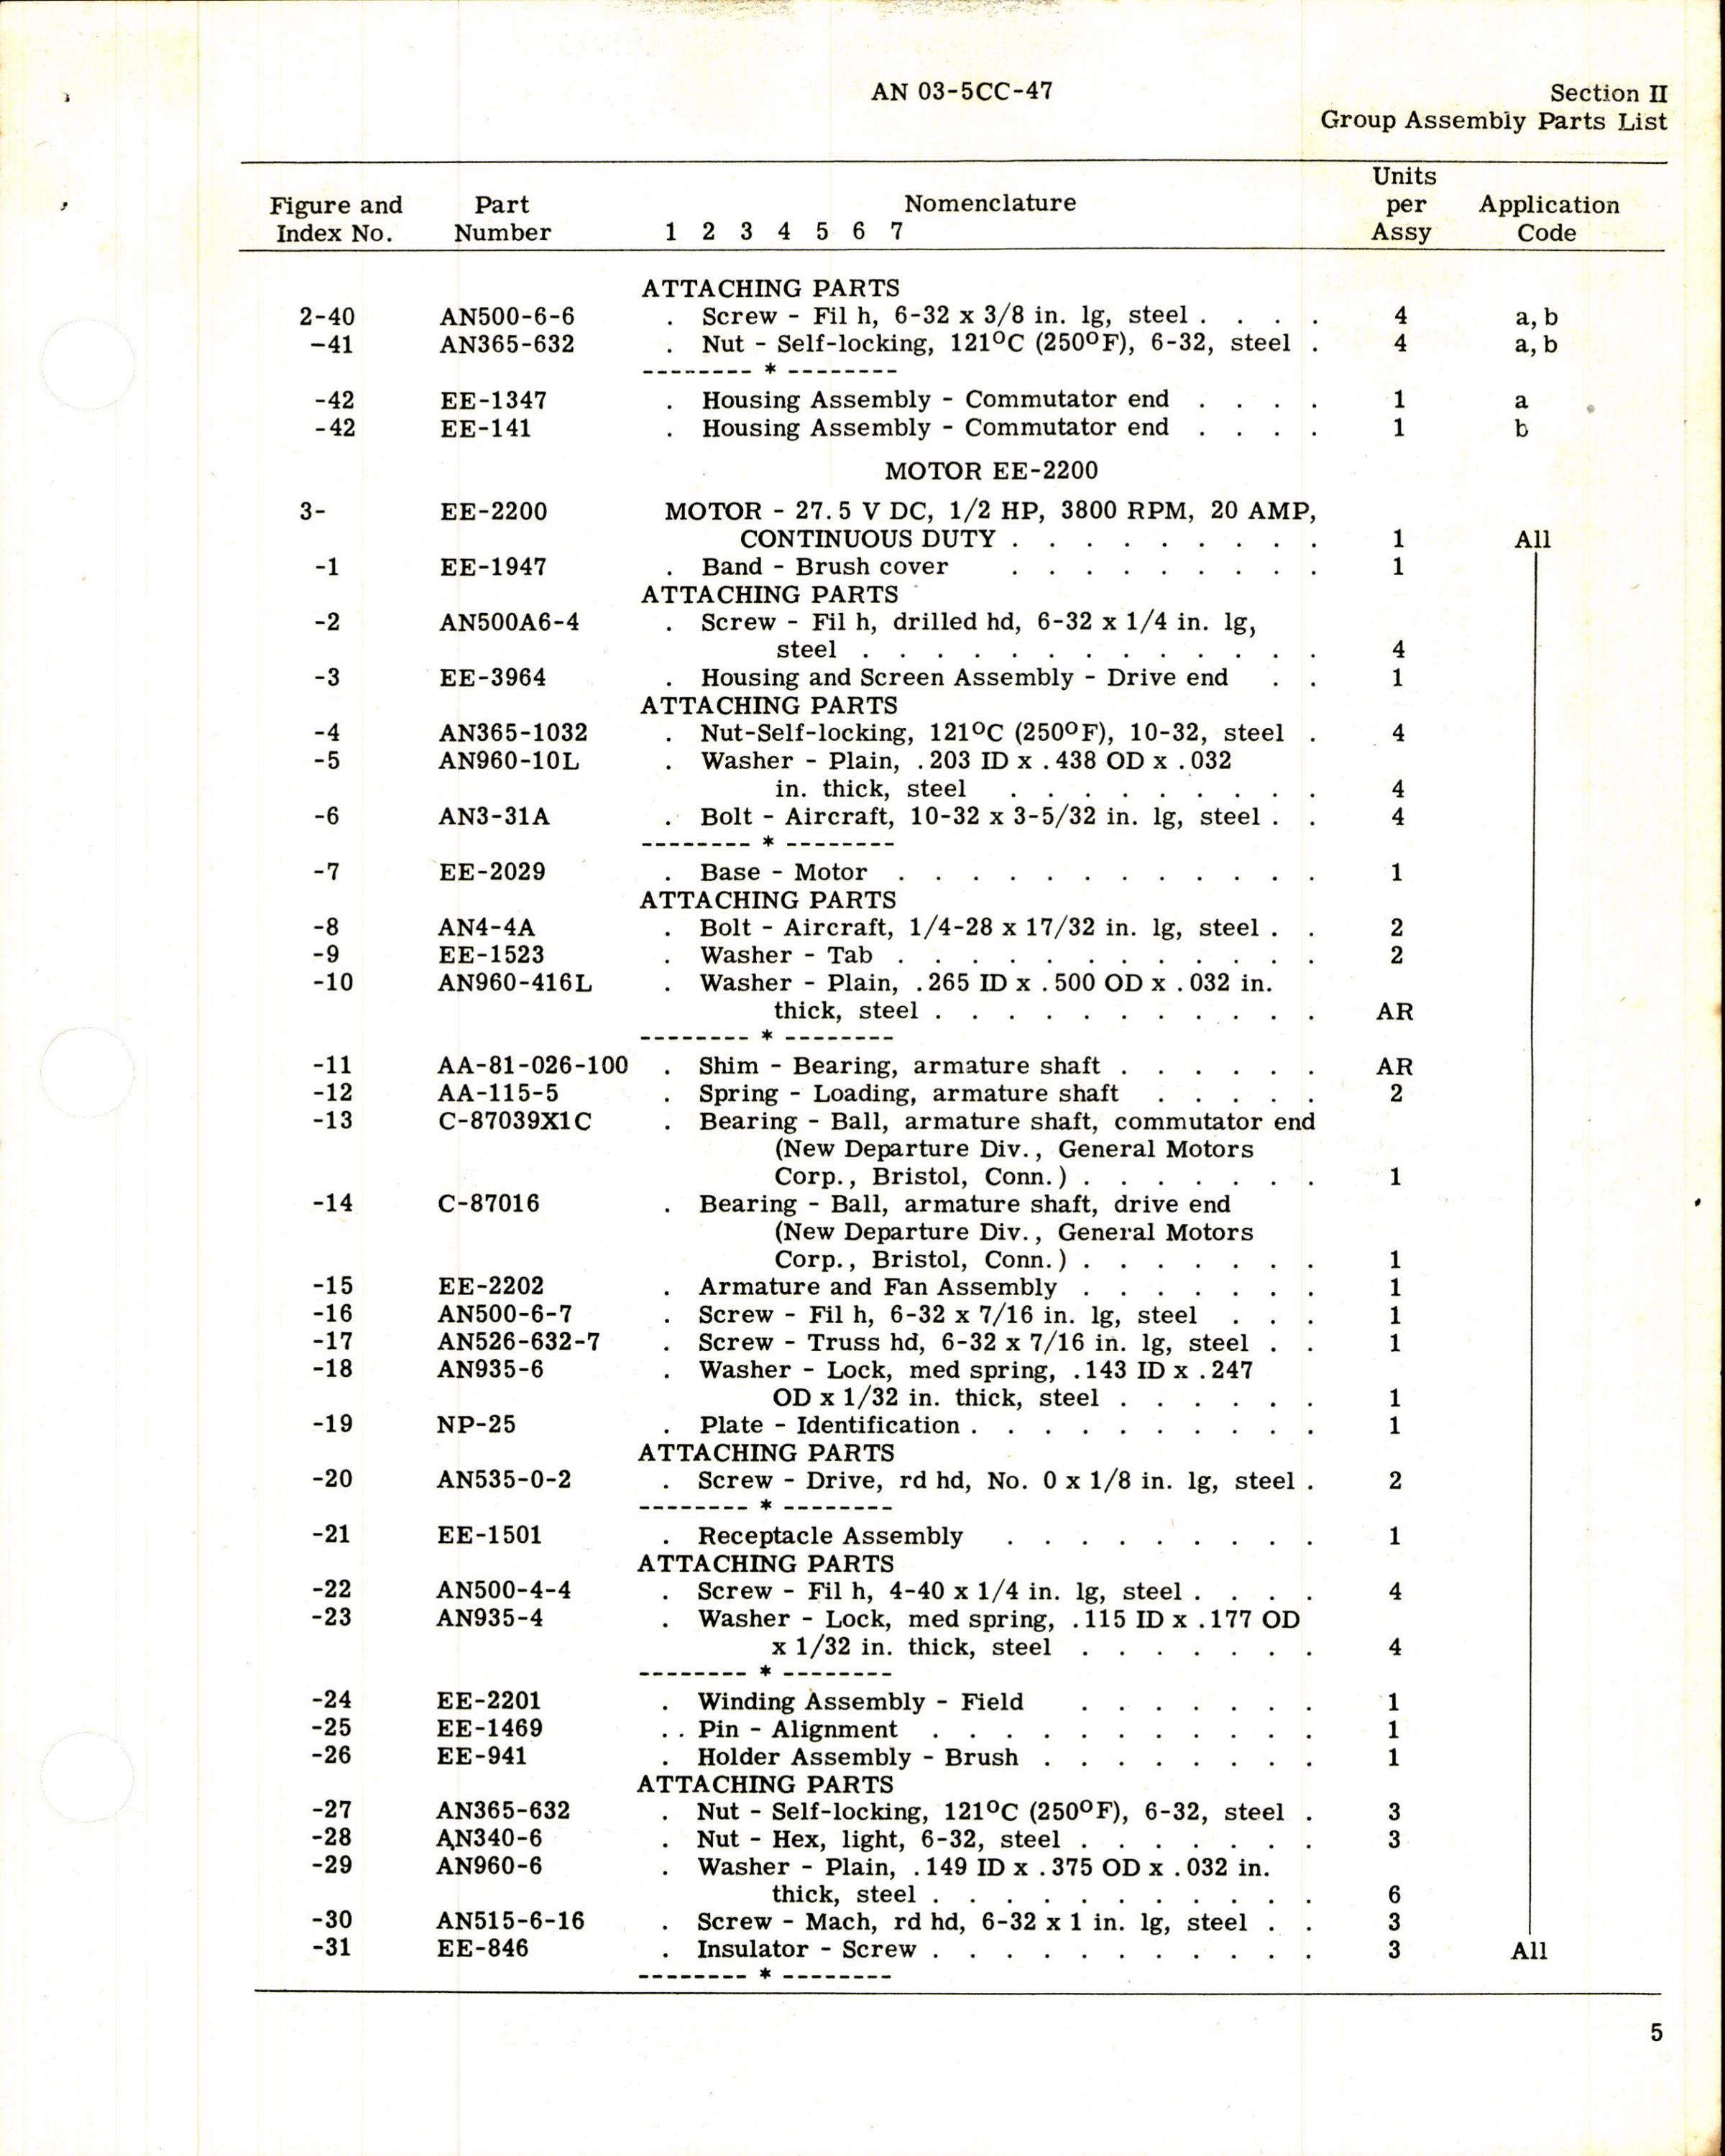 Sample page 5 from AirCorps Library document: Parts Catalog for Air Associates Electric Motors